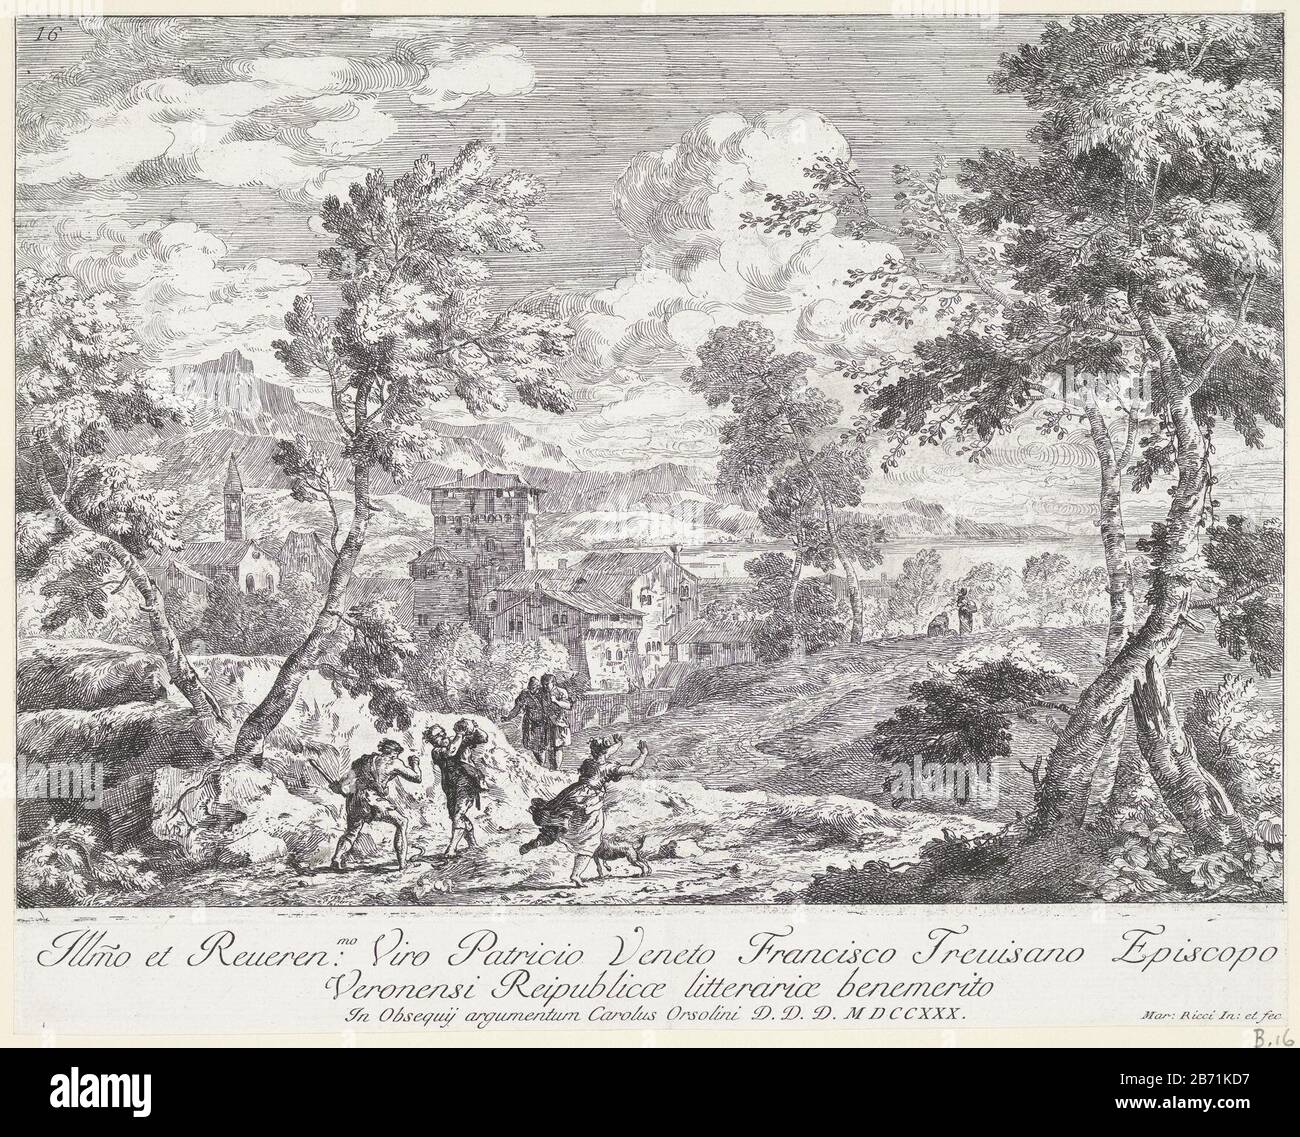 Landschap met twee boeren die een slang doden Landschappen (serietitel) Varia Marci Ricci Pictoris prestantissimi Experiment () (serietitel) Hill landscape with the foreground two peasants a snake trying to kill. A woman flees to the hose. Command ondermarge. Manufacturer : printmaker: Marco Ricci (listed building) in its design: Marco Ricci (listed building) commanded by Carlo Orsolini (listed building) dedicated to Francesco Trevisani (listed property) Place manufacture: Italy Date: 1730 Physical features: etching printed on one sheet of two sheets of material: paper Technique: etching dimen Stock Photo